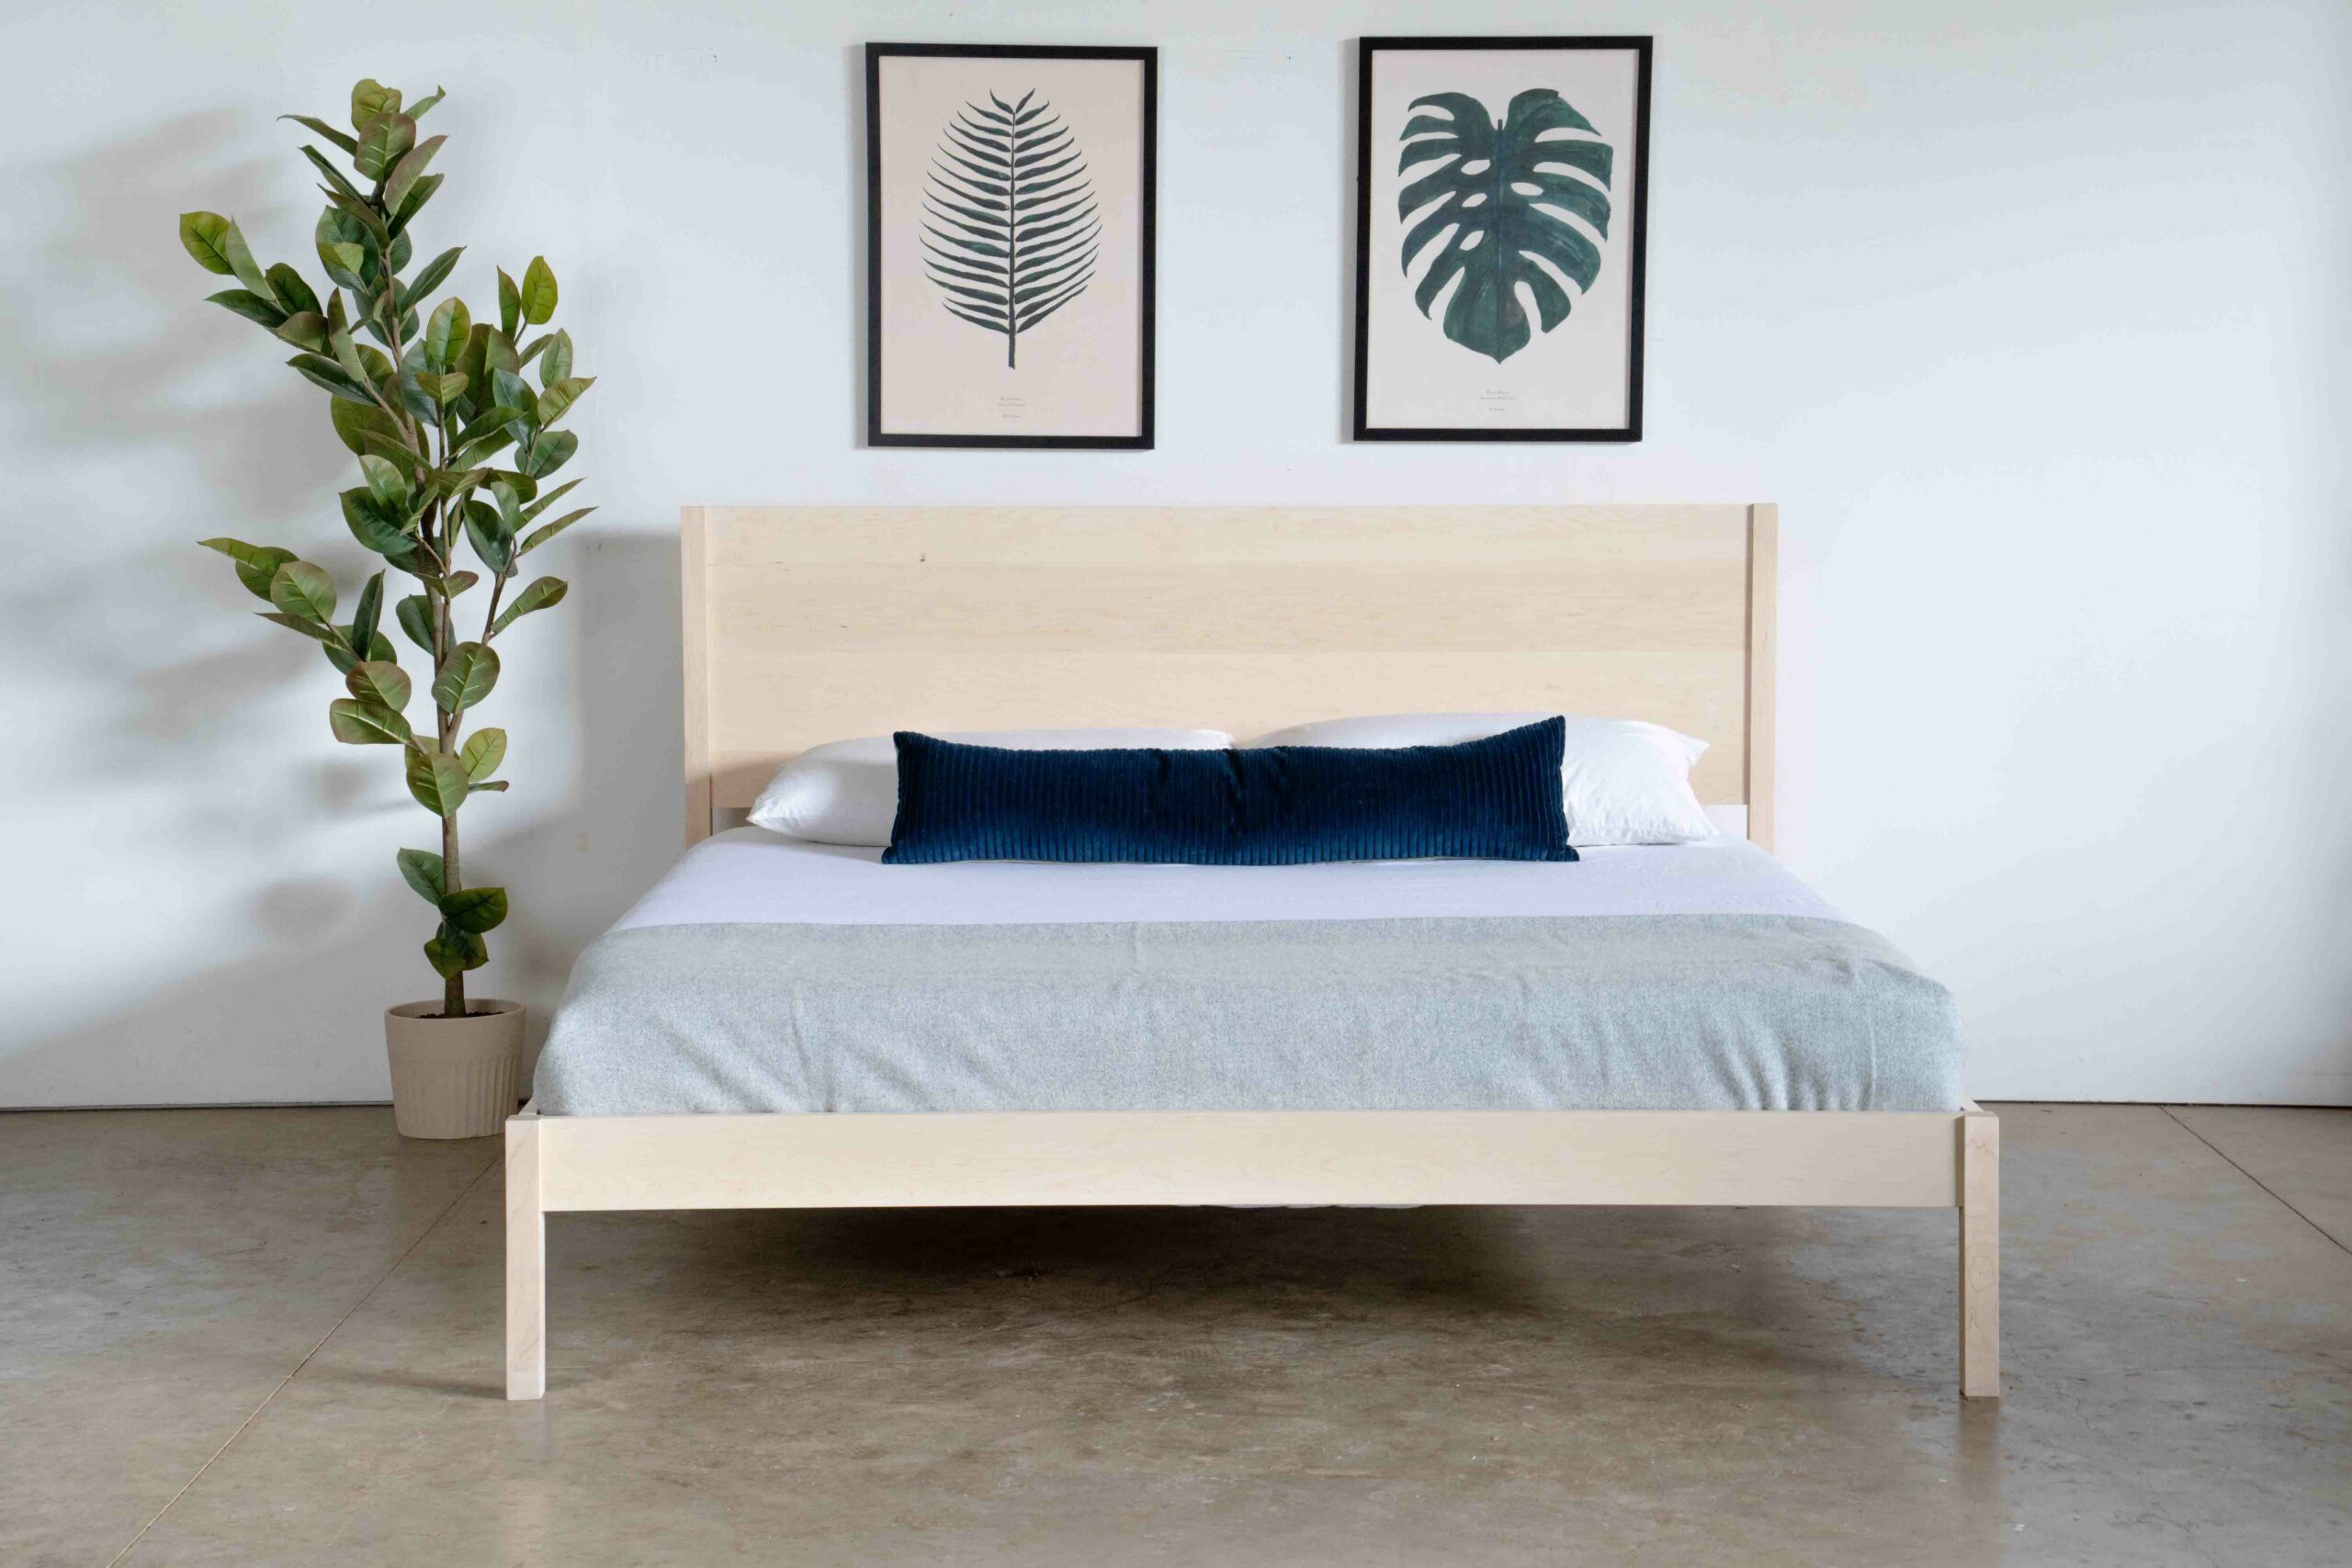 A simple platform bed in maple with a mattress and pillows, standing next to a plant.